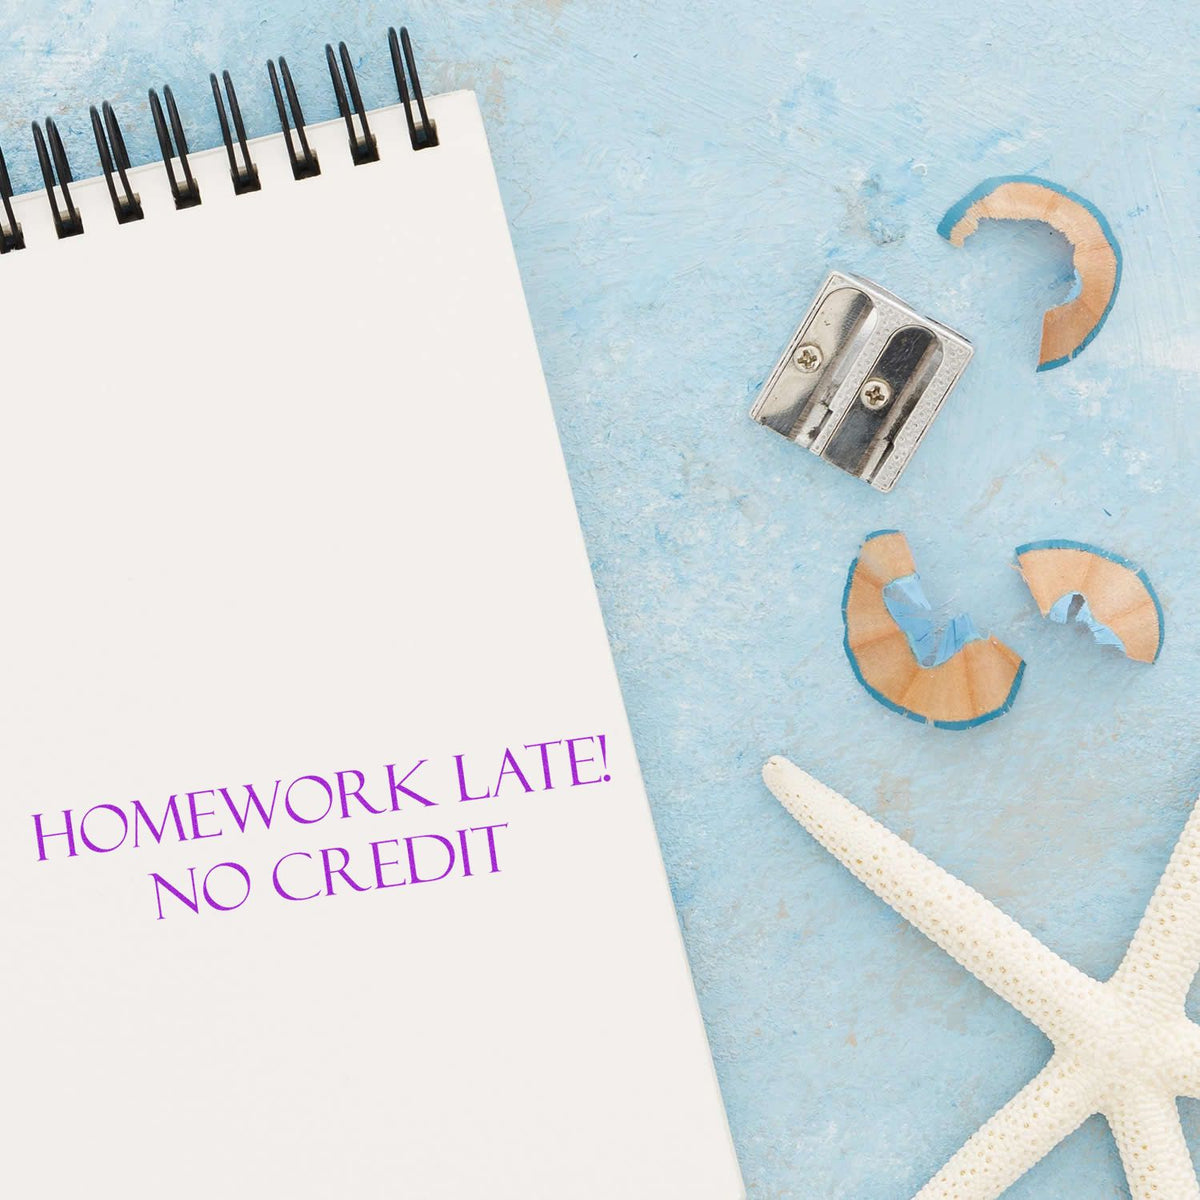 Self Inking Homework Late No Credit Stamp In Use